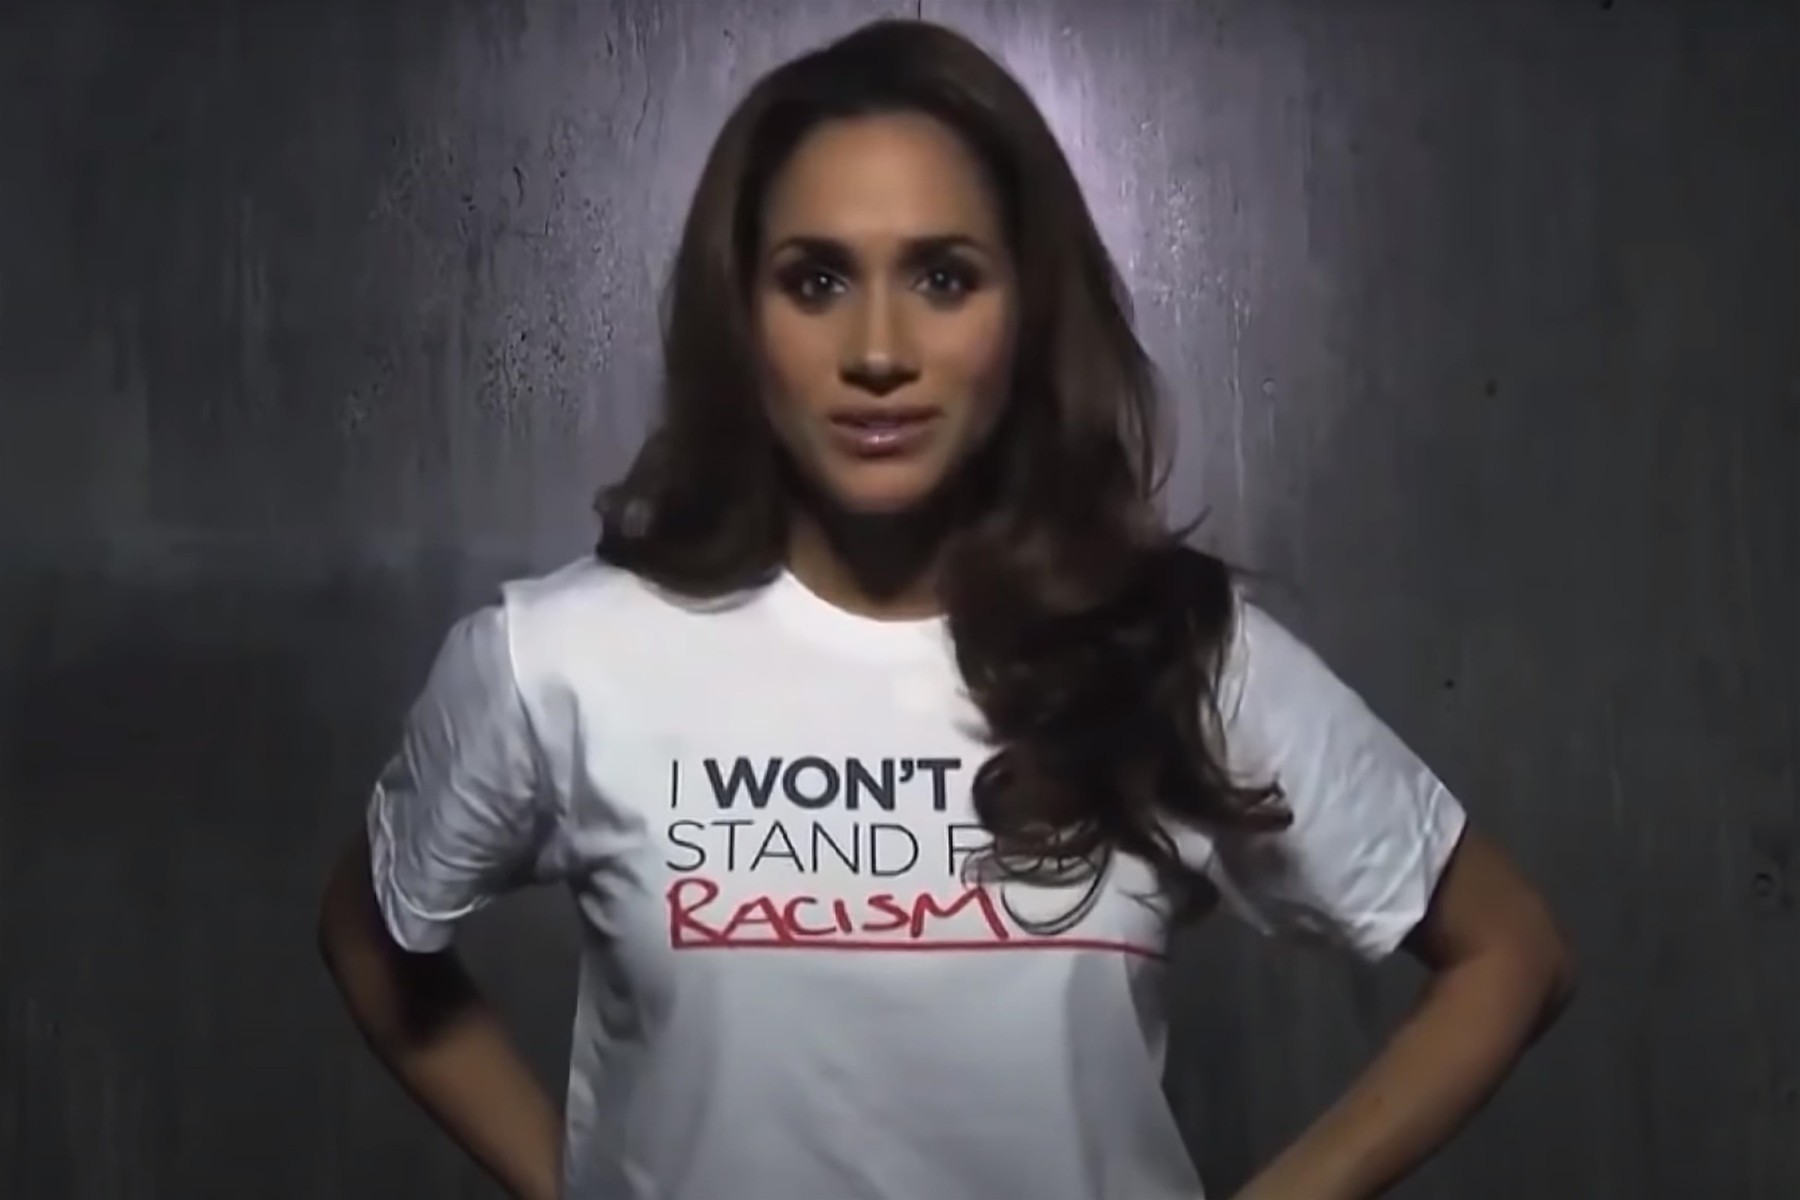 Los Angeles,   - Meghan Markle On Racial Injustice In Resurfaced 2012 Video.  A powerful video of Meghan Markle from 2012 is now making waves yet again following the tragic death of George Floyd. In the throwback video, a pre-royal Meghan wore a shirt that read 